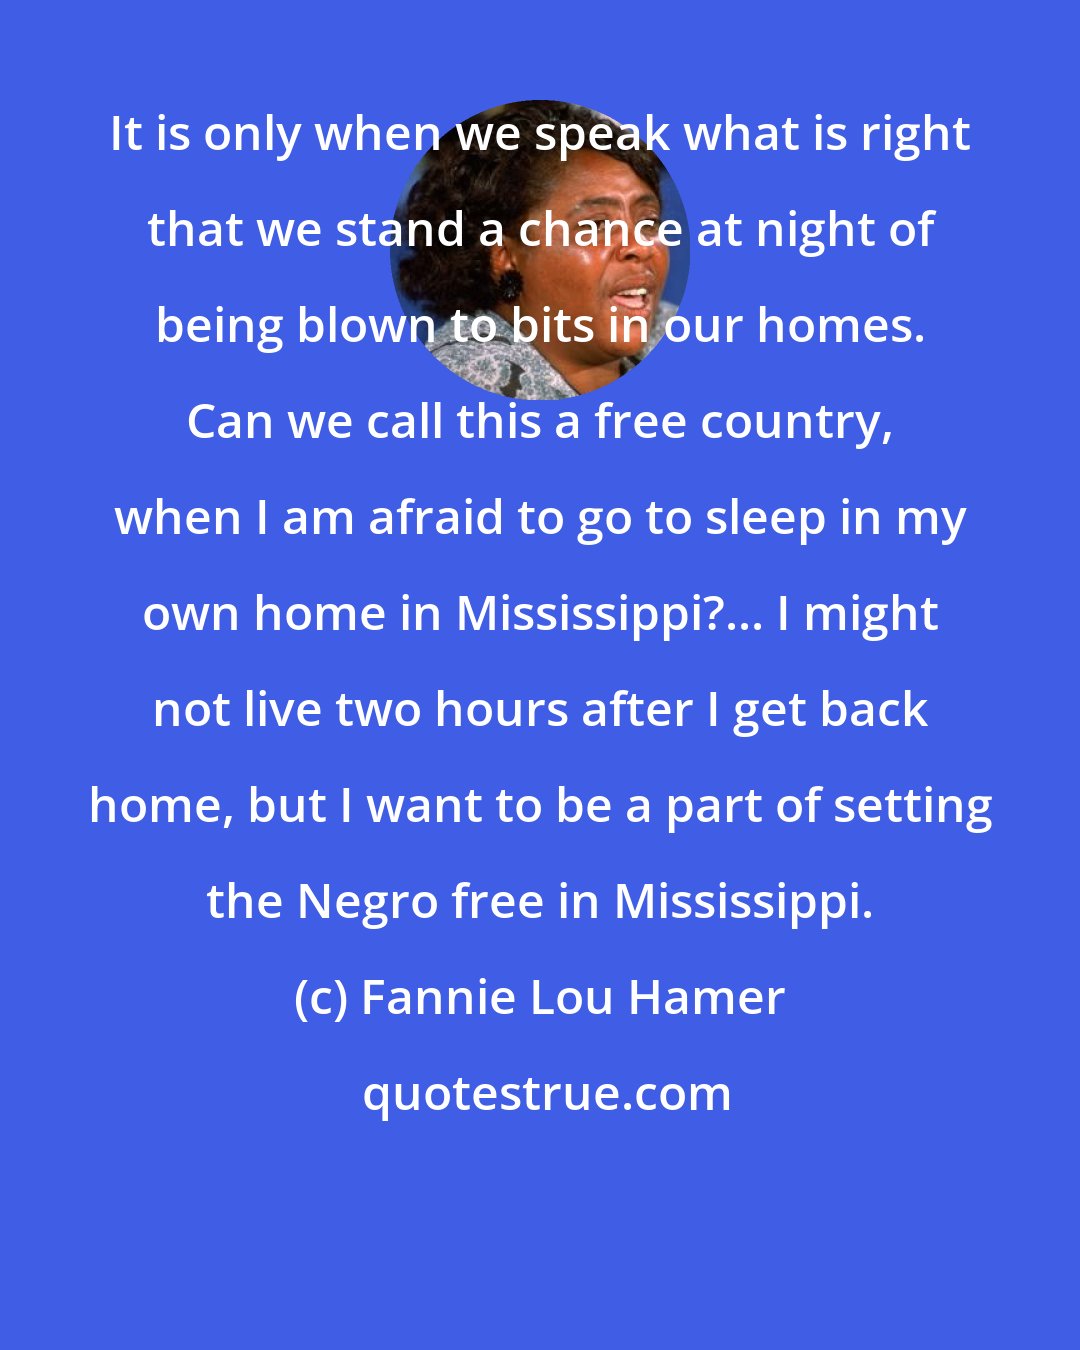 Fannie Lou Hamer: It is only when we speak what is right that we stand a chance at night of being blown to bits in our homes. Can we call this a free country, when I am afraid to go to sleep in my own home in Mississippi?... I might not live two hours after I get back home, but I want to be a part of setting the Negro free in Mississippi.